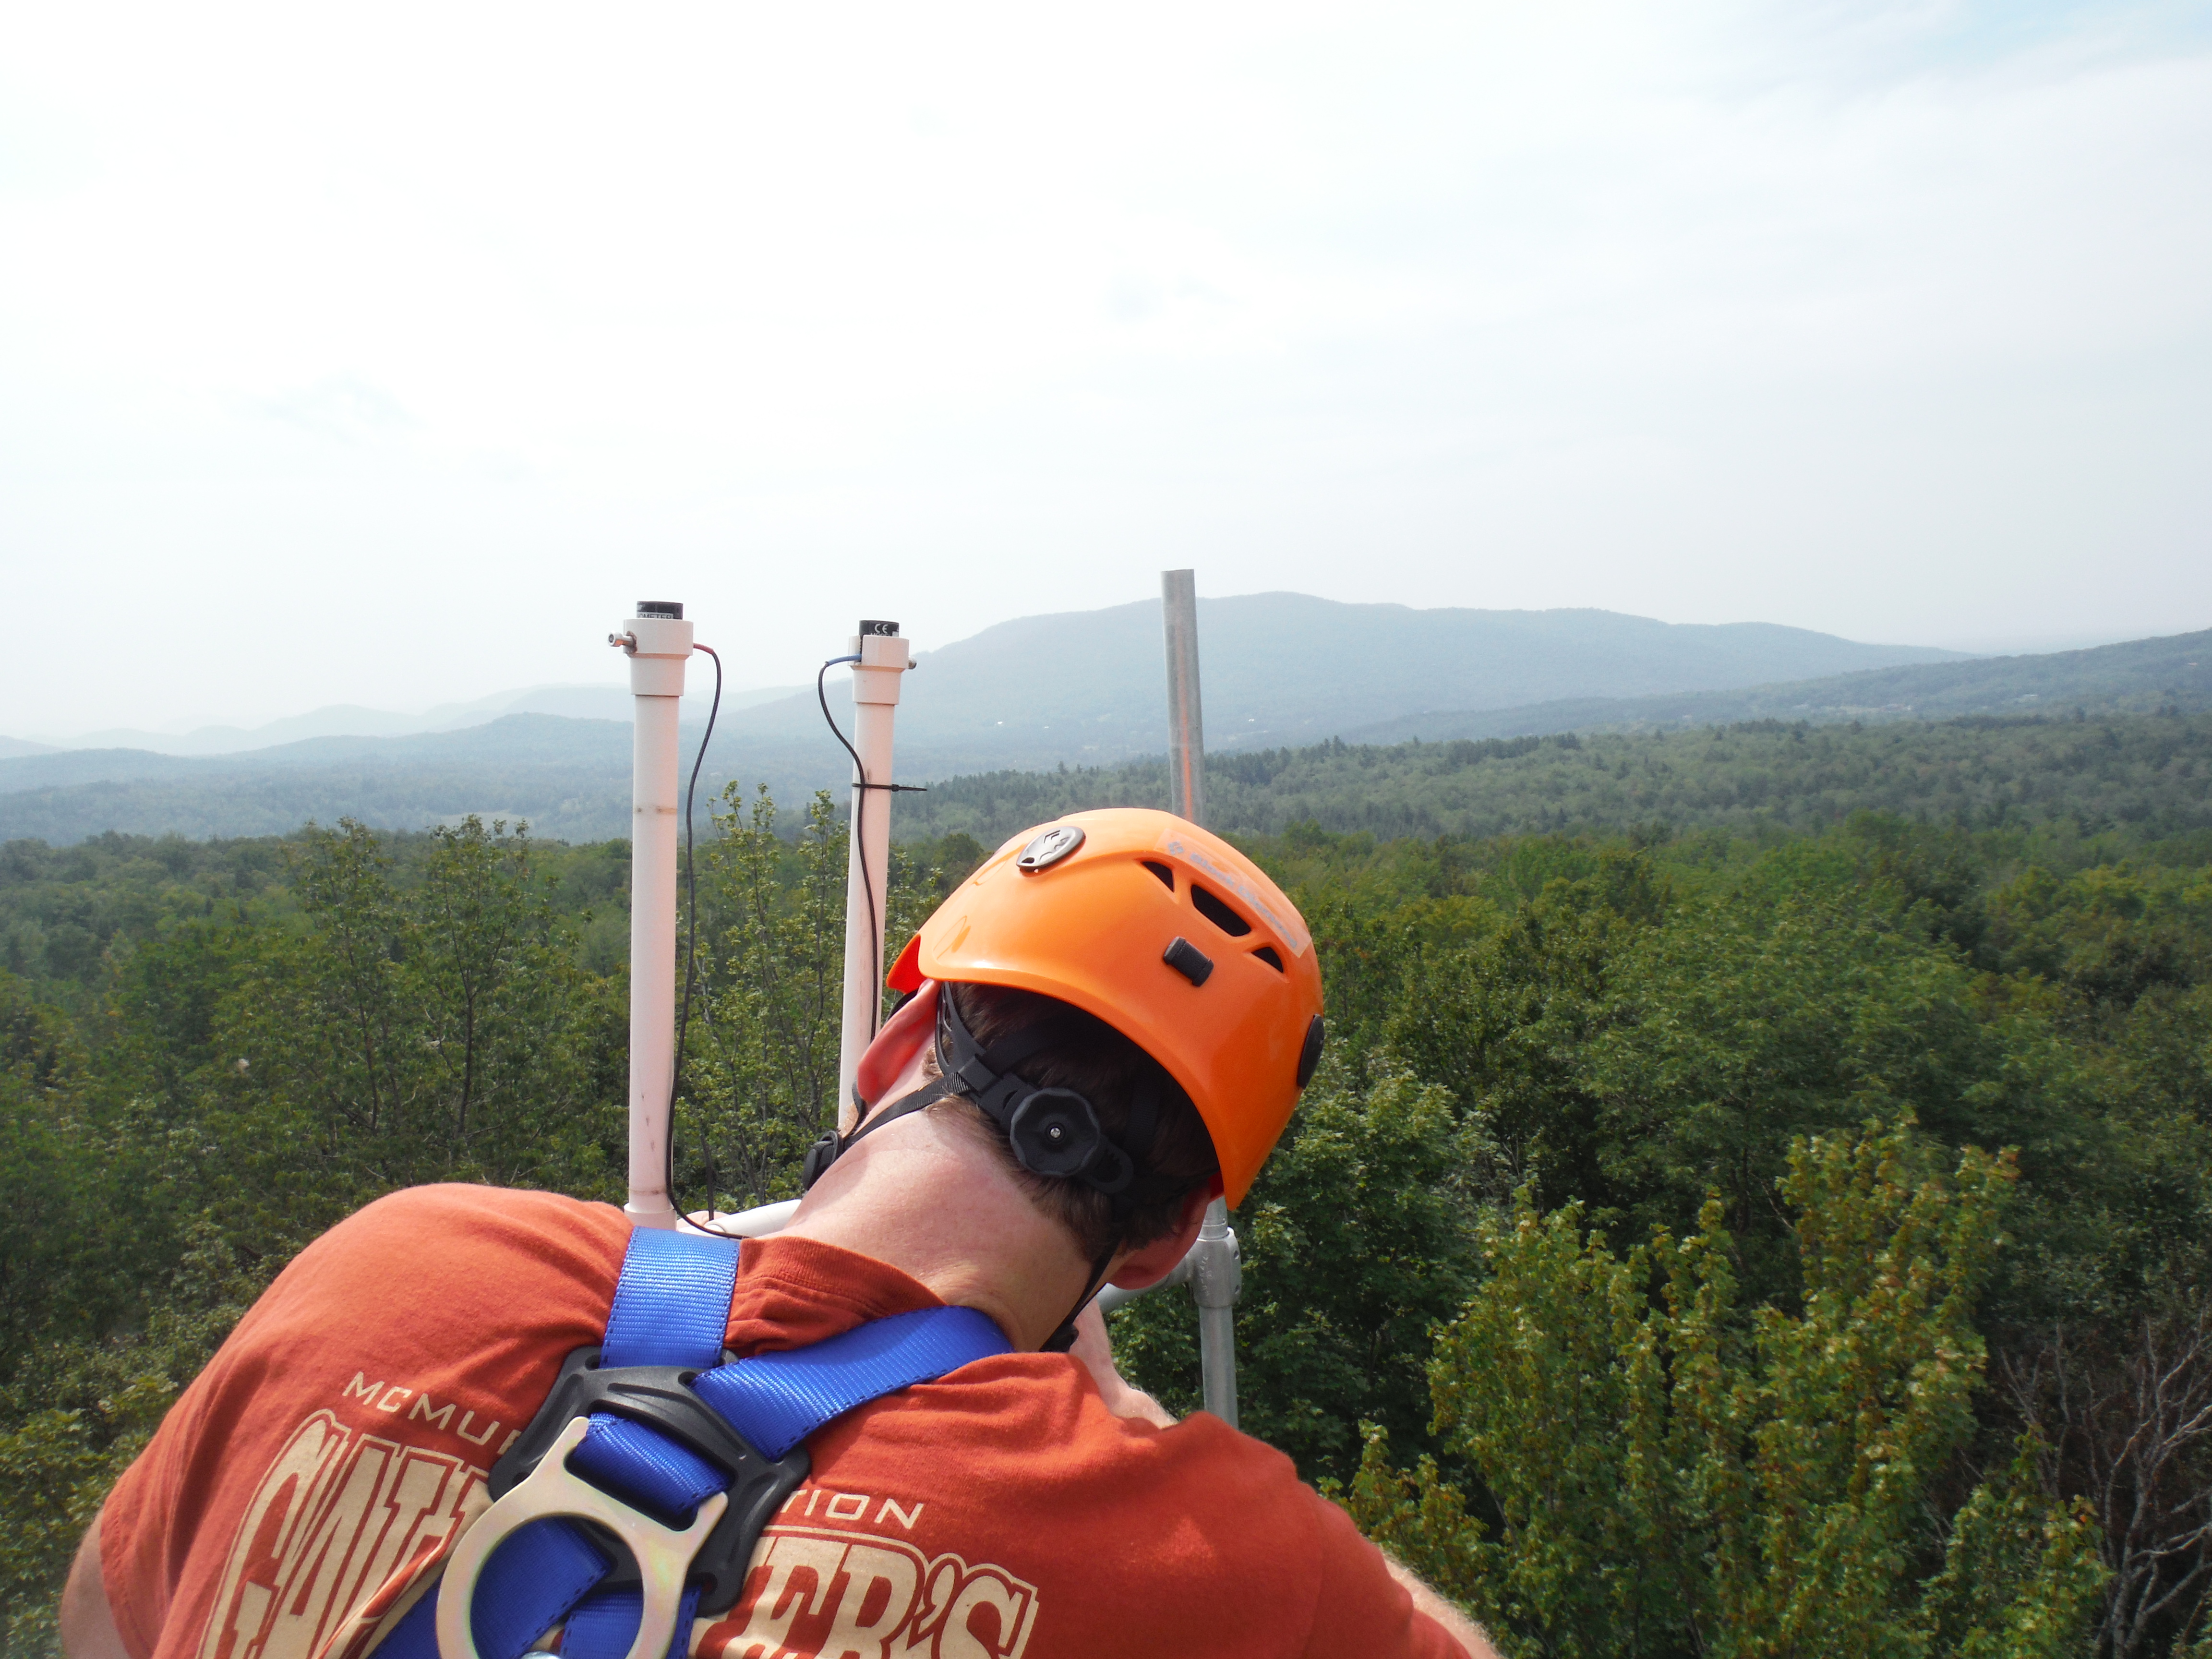 The FEMC takes meteorological measurements at 0.5, 7.5, 17, and 24 meters above the forest floor at 1300’ at the canopy research tower at the Proctor Maple Research Center in Underhill, VT.